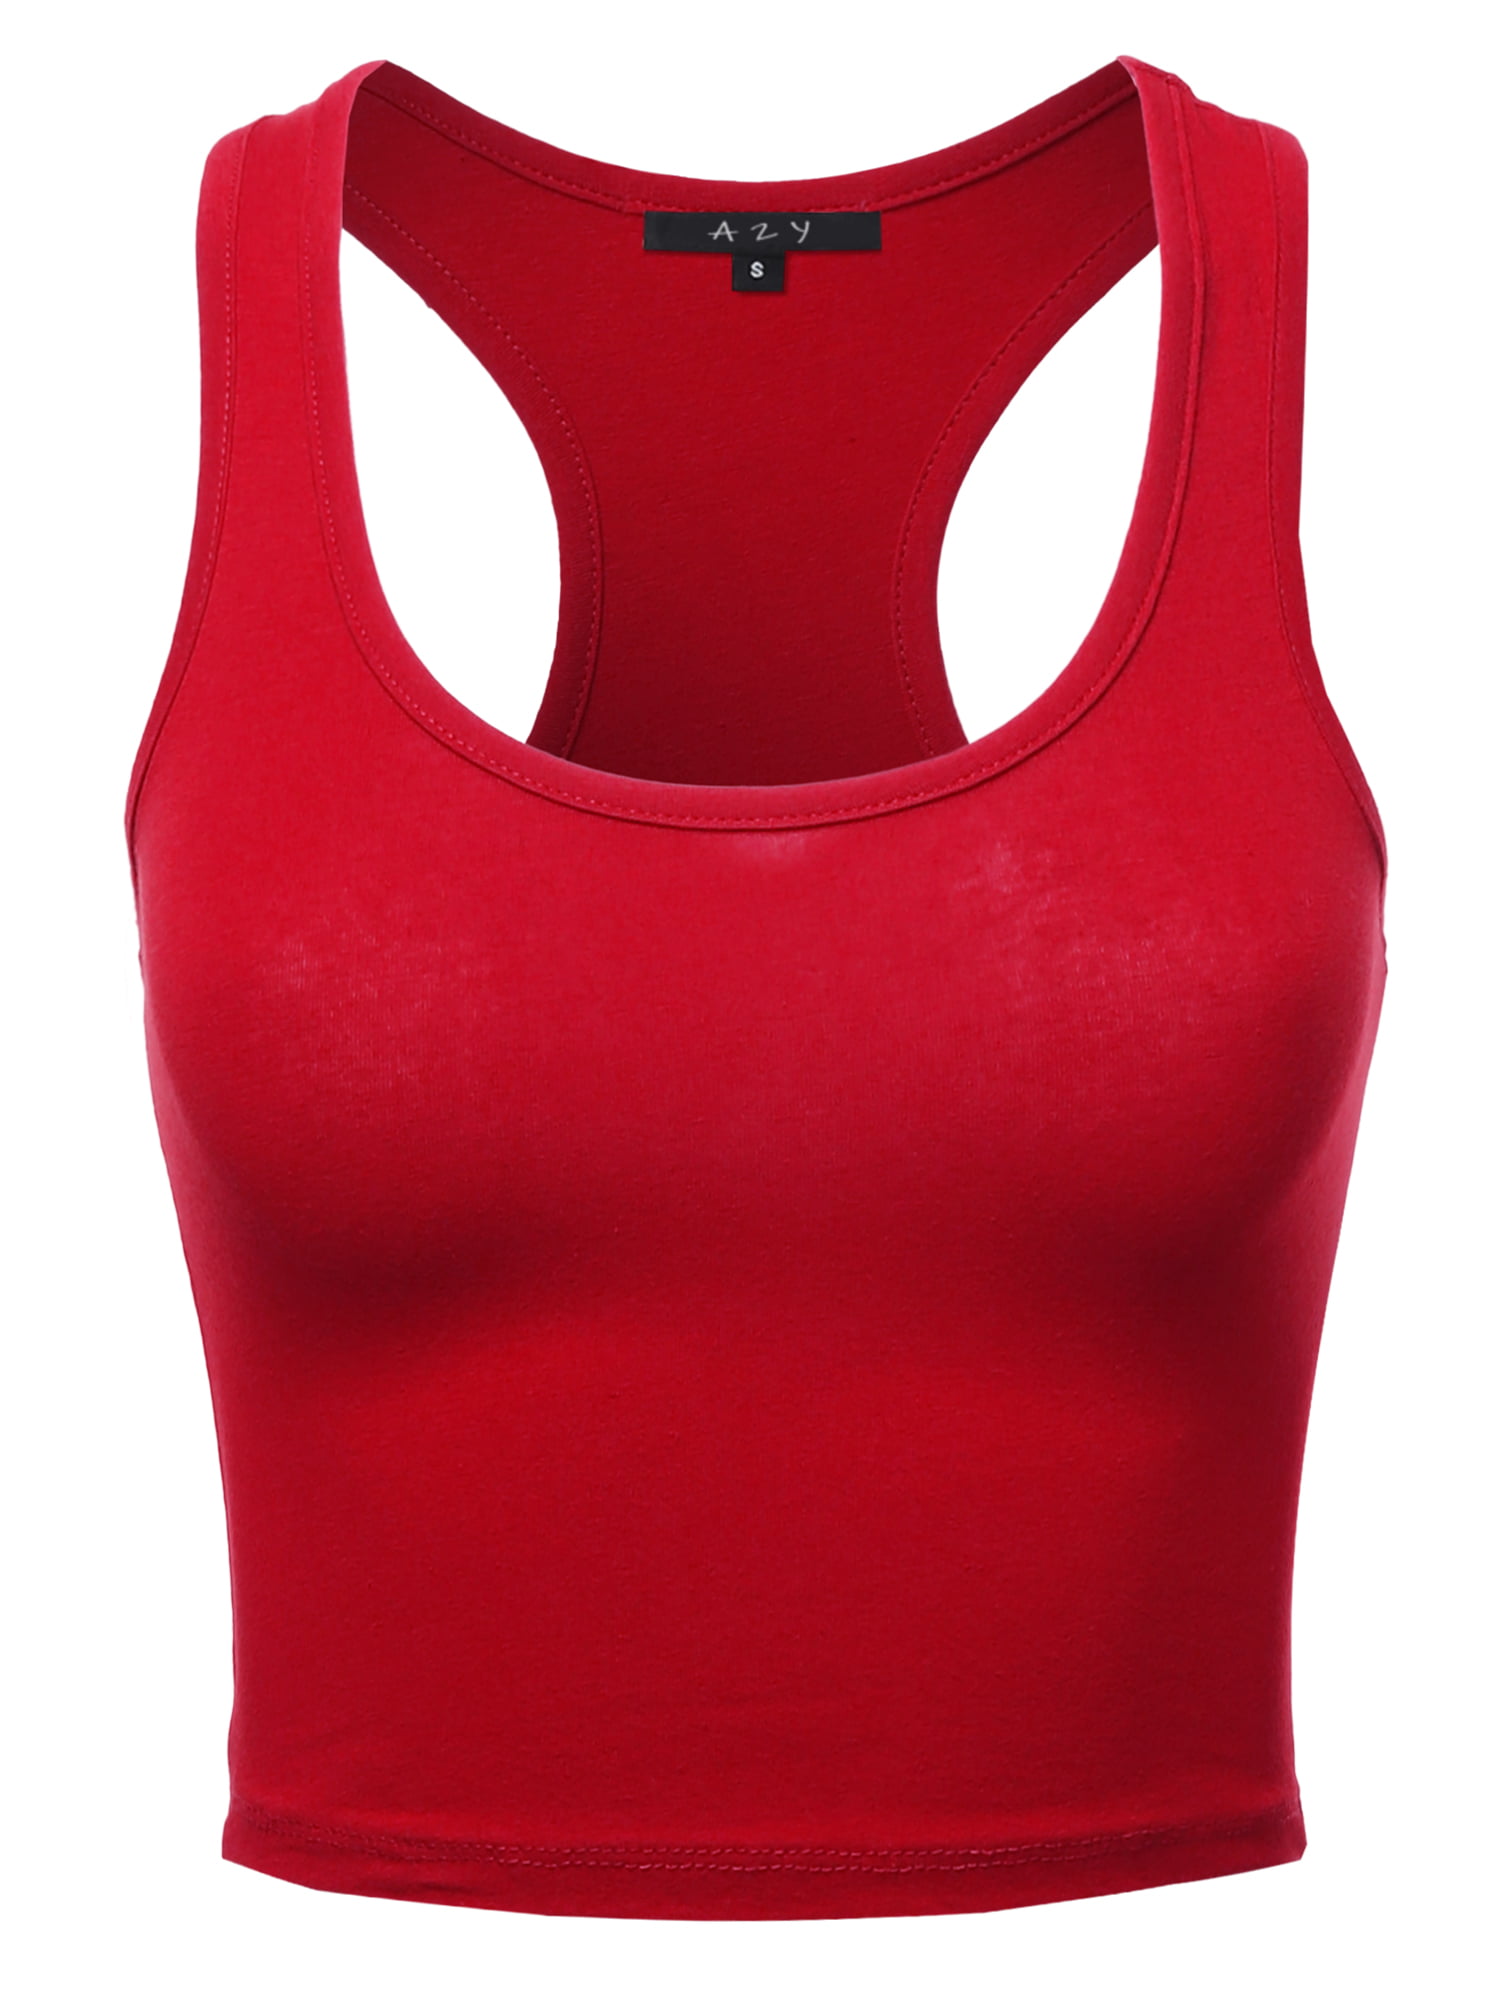 A2y A2y Women S Basic Cotton Casual Scoop Neck Sleeveless Cropped Racerback Tank Tops Deep Red